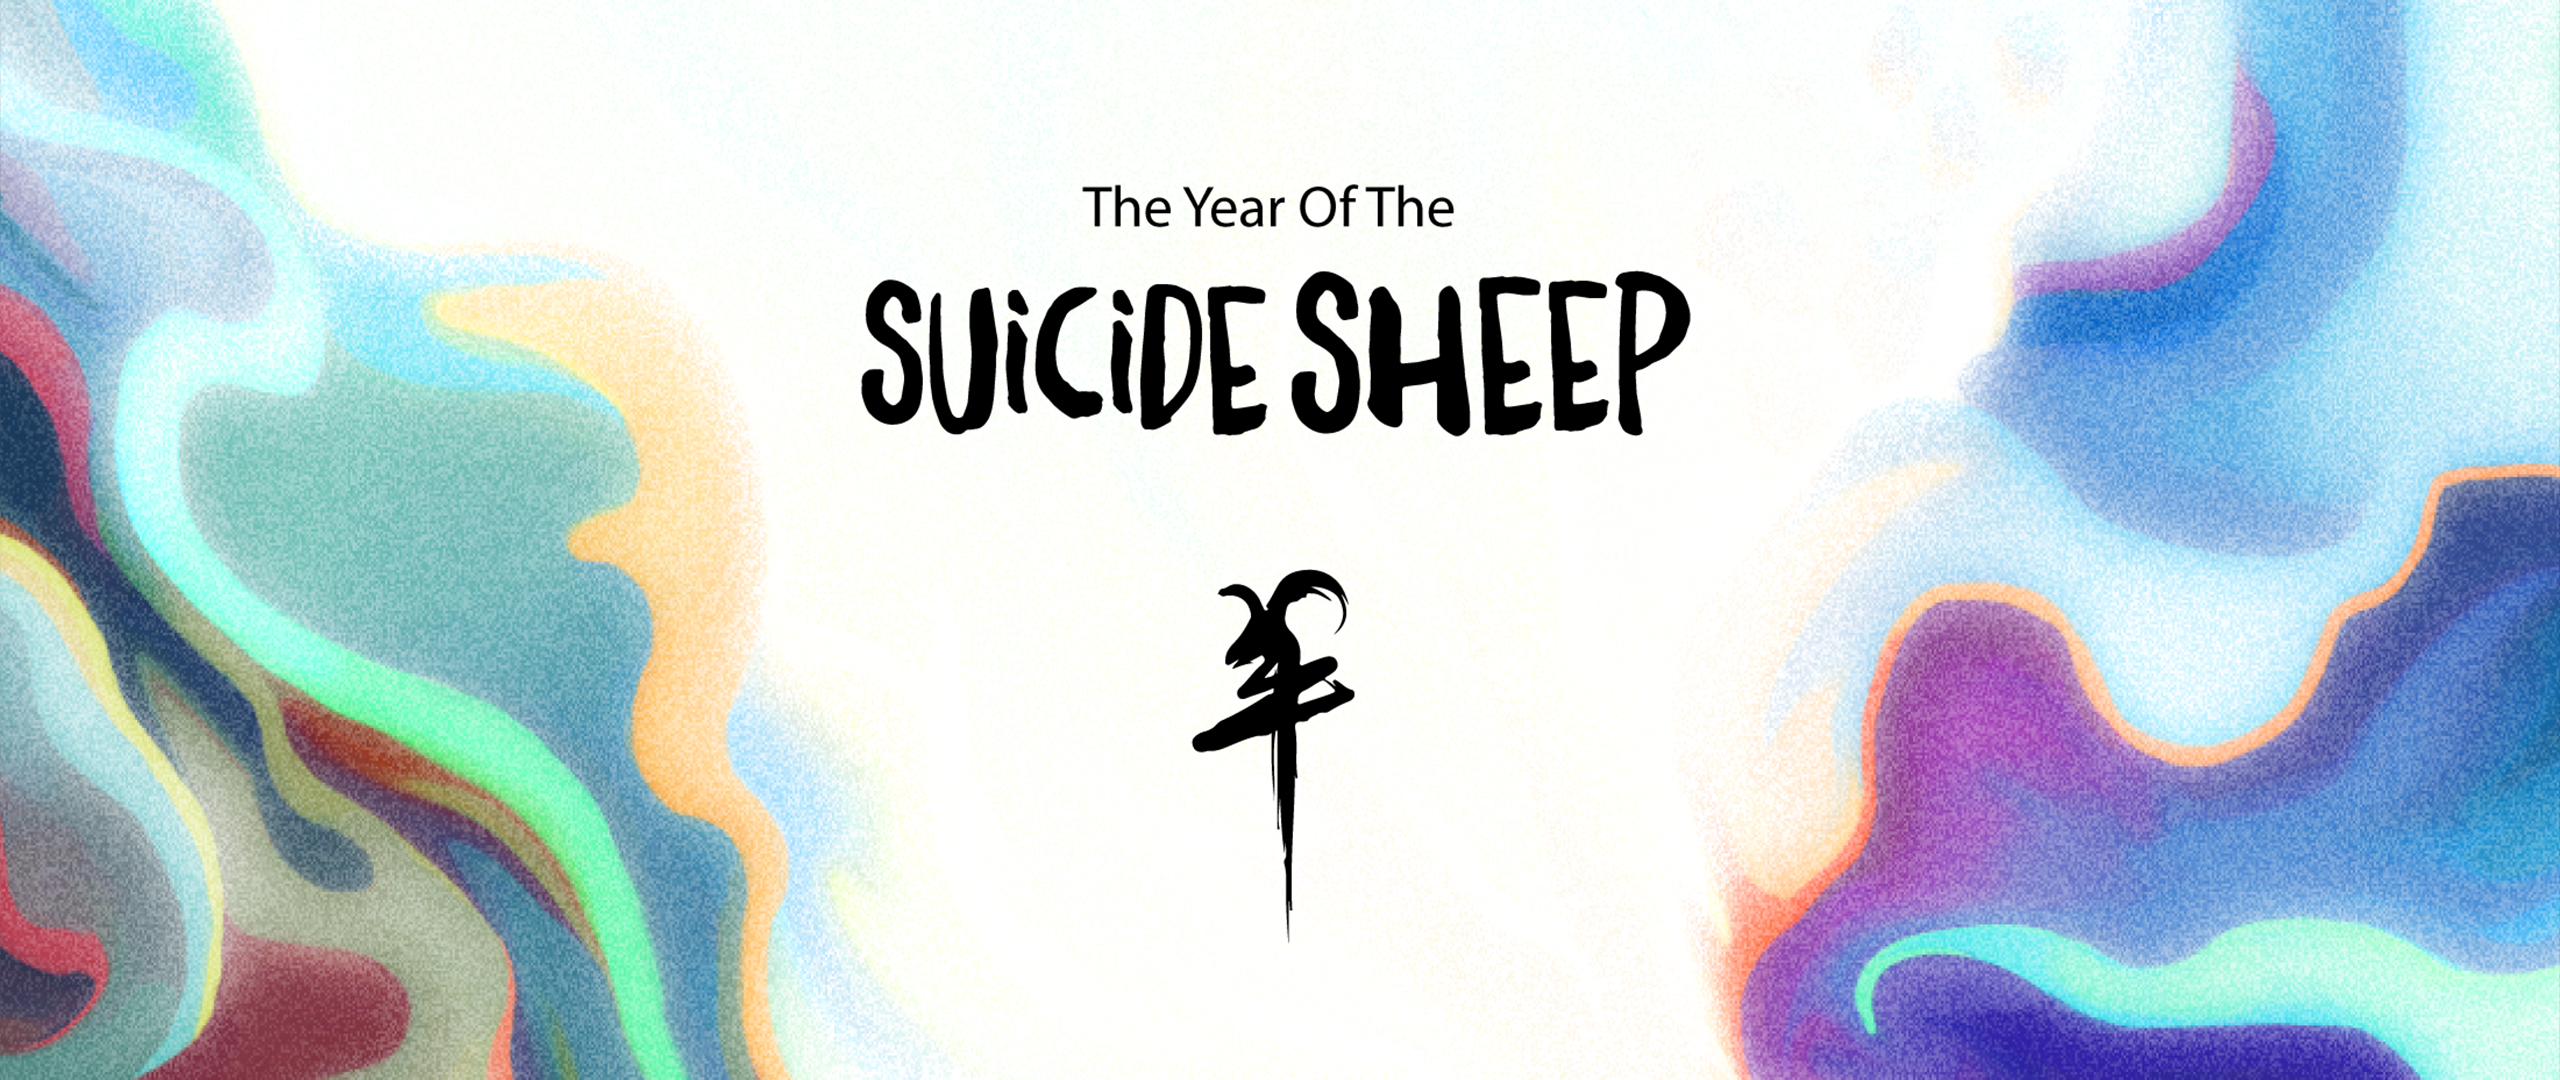 General 2560x1080 ultrawide Suicide Sheep artwork shapes musician